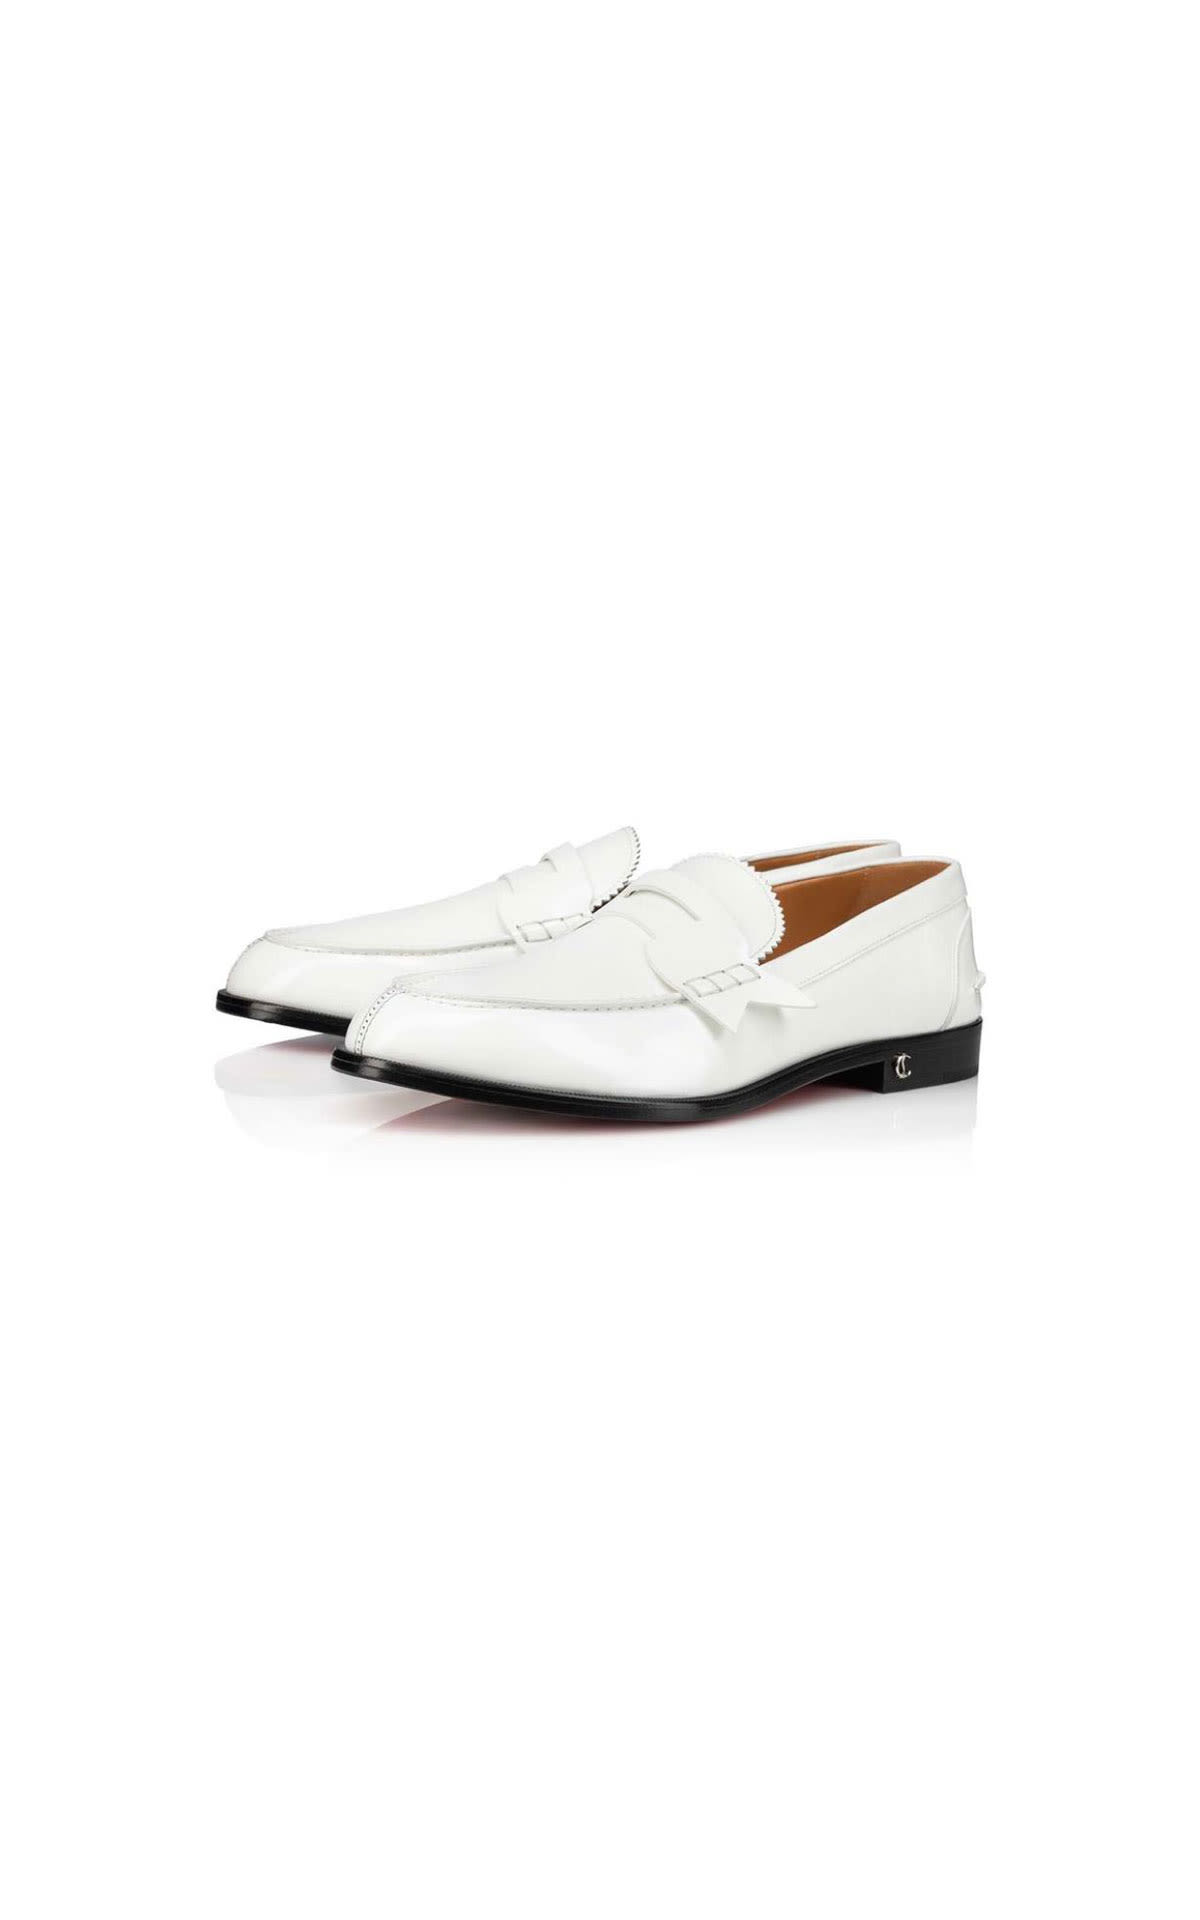 Christian Louboutin No Penny loafers from Bicester Village